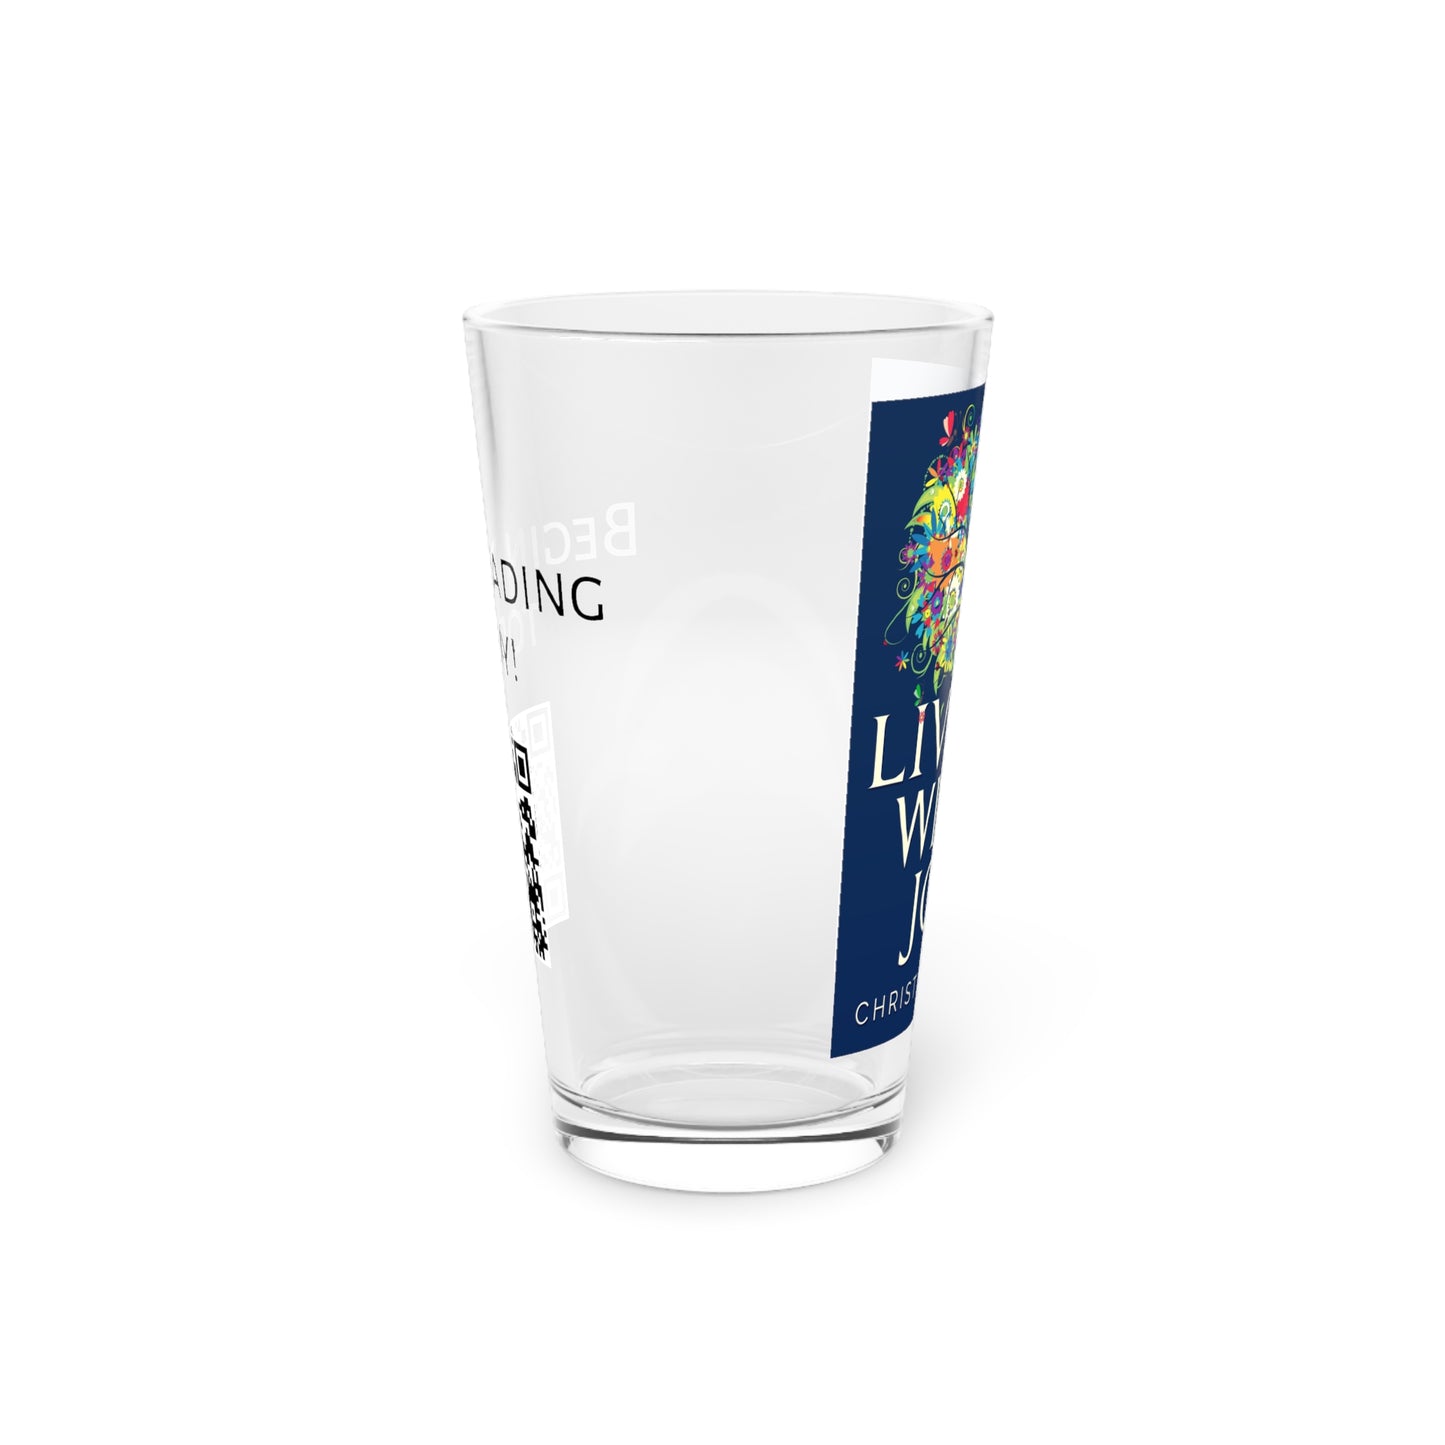 Living With Joy - Pint Glass